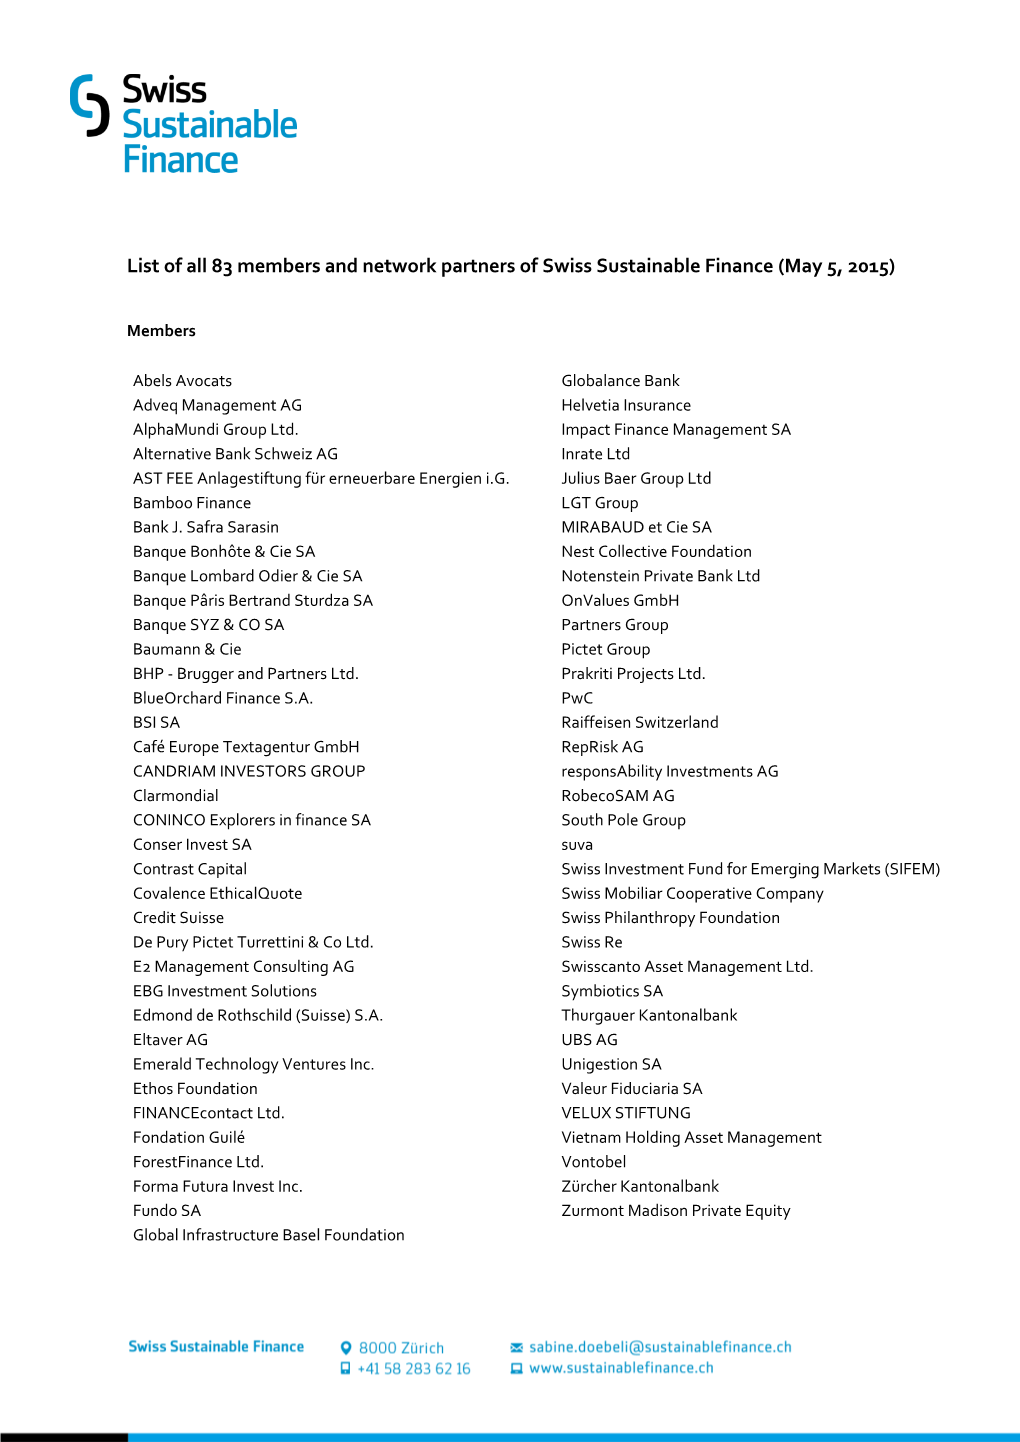 List of All 83 Members and Network Partners of Swiss Sustainable Finance (May 5, 2015)